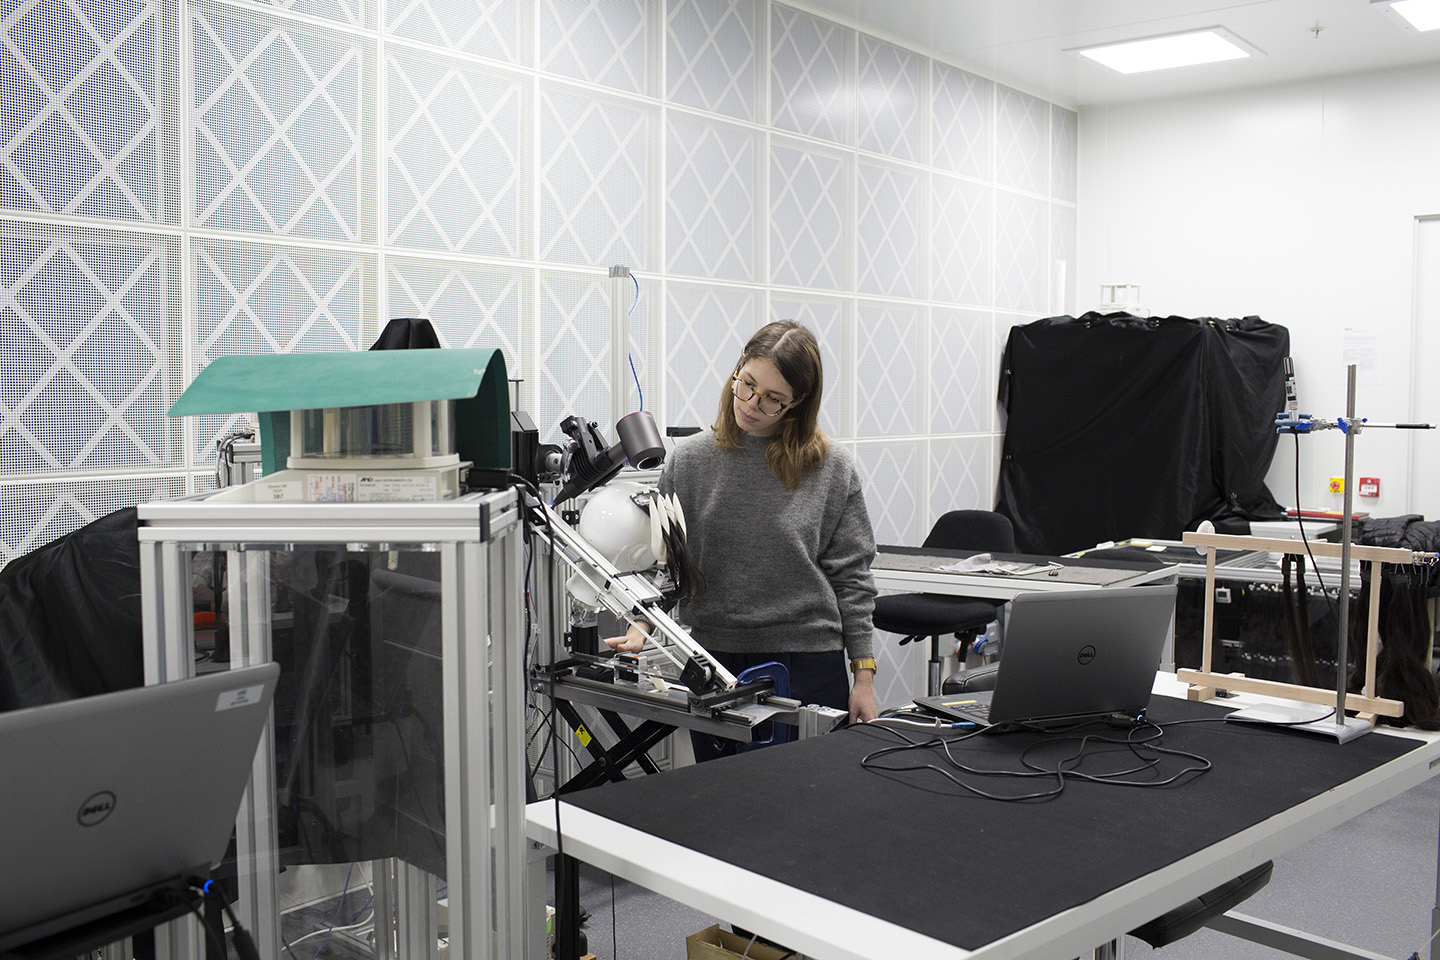   Design engineer Laura Howard, working in the hair research lab at Dyson.&nbsp;  